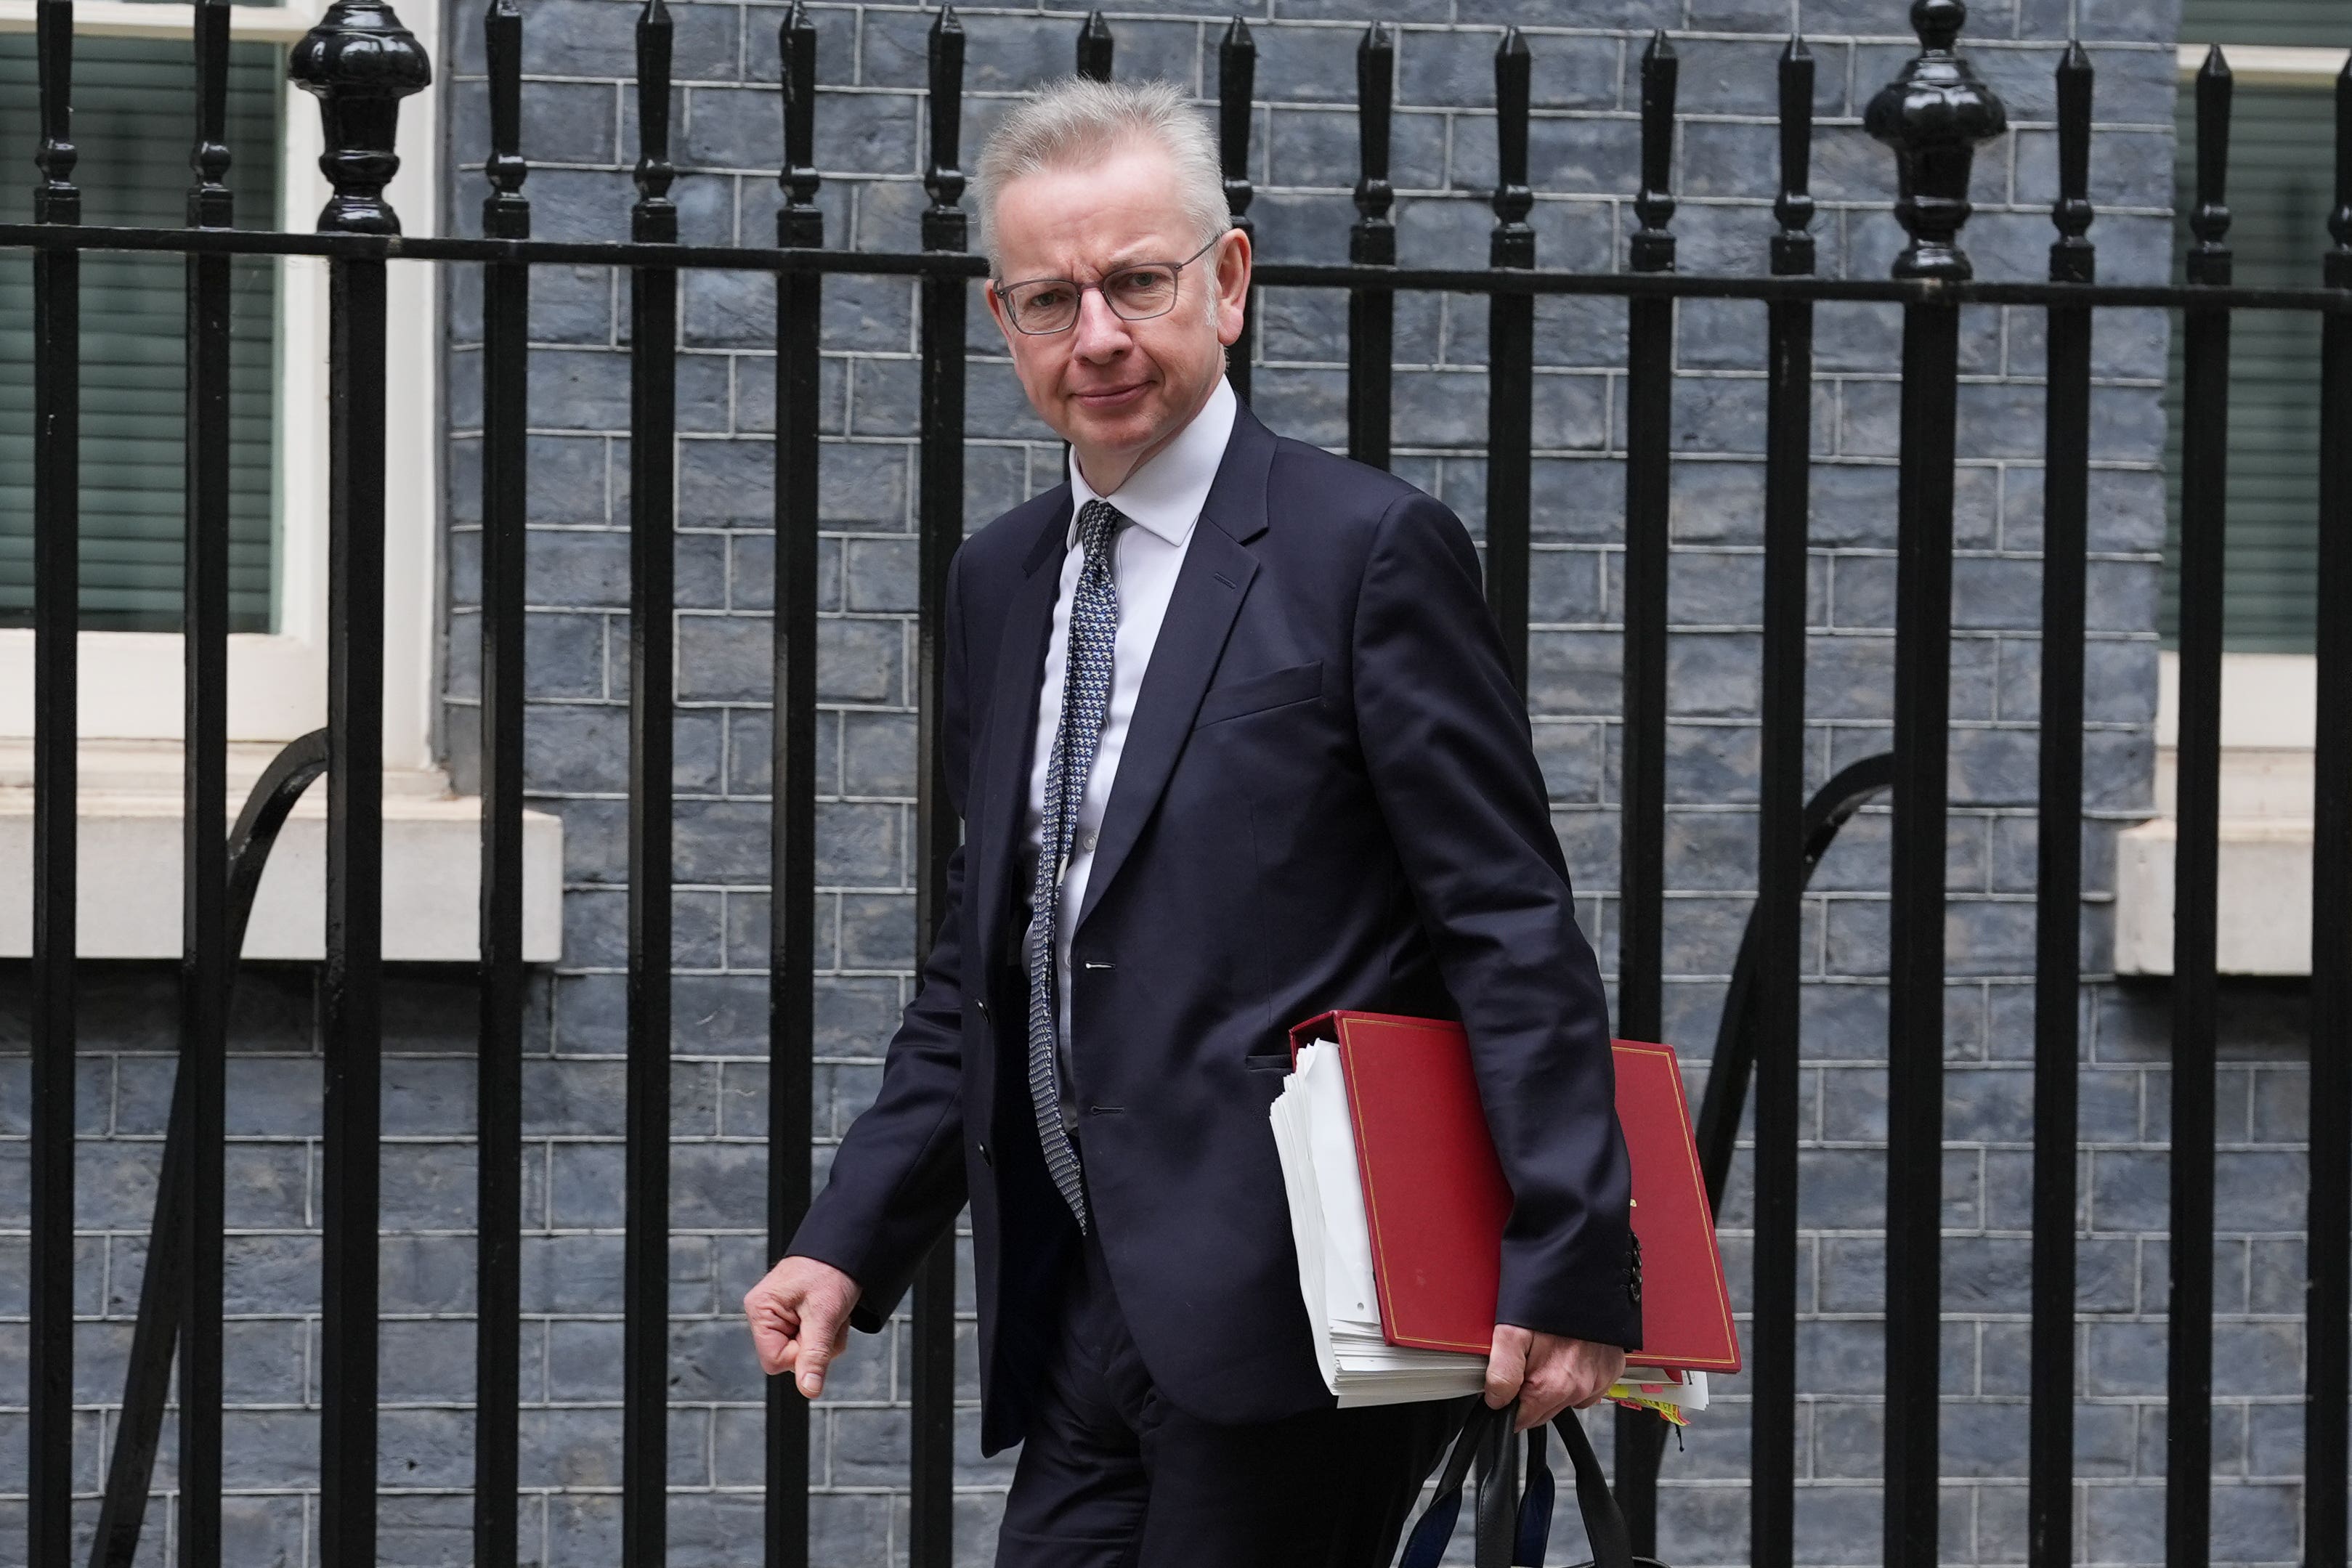 Mr Gove will not stand at the upcoming general election